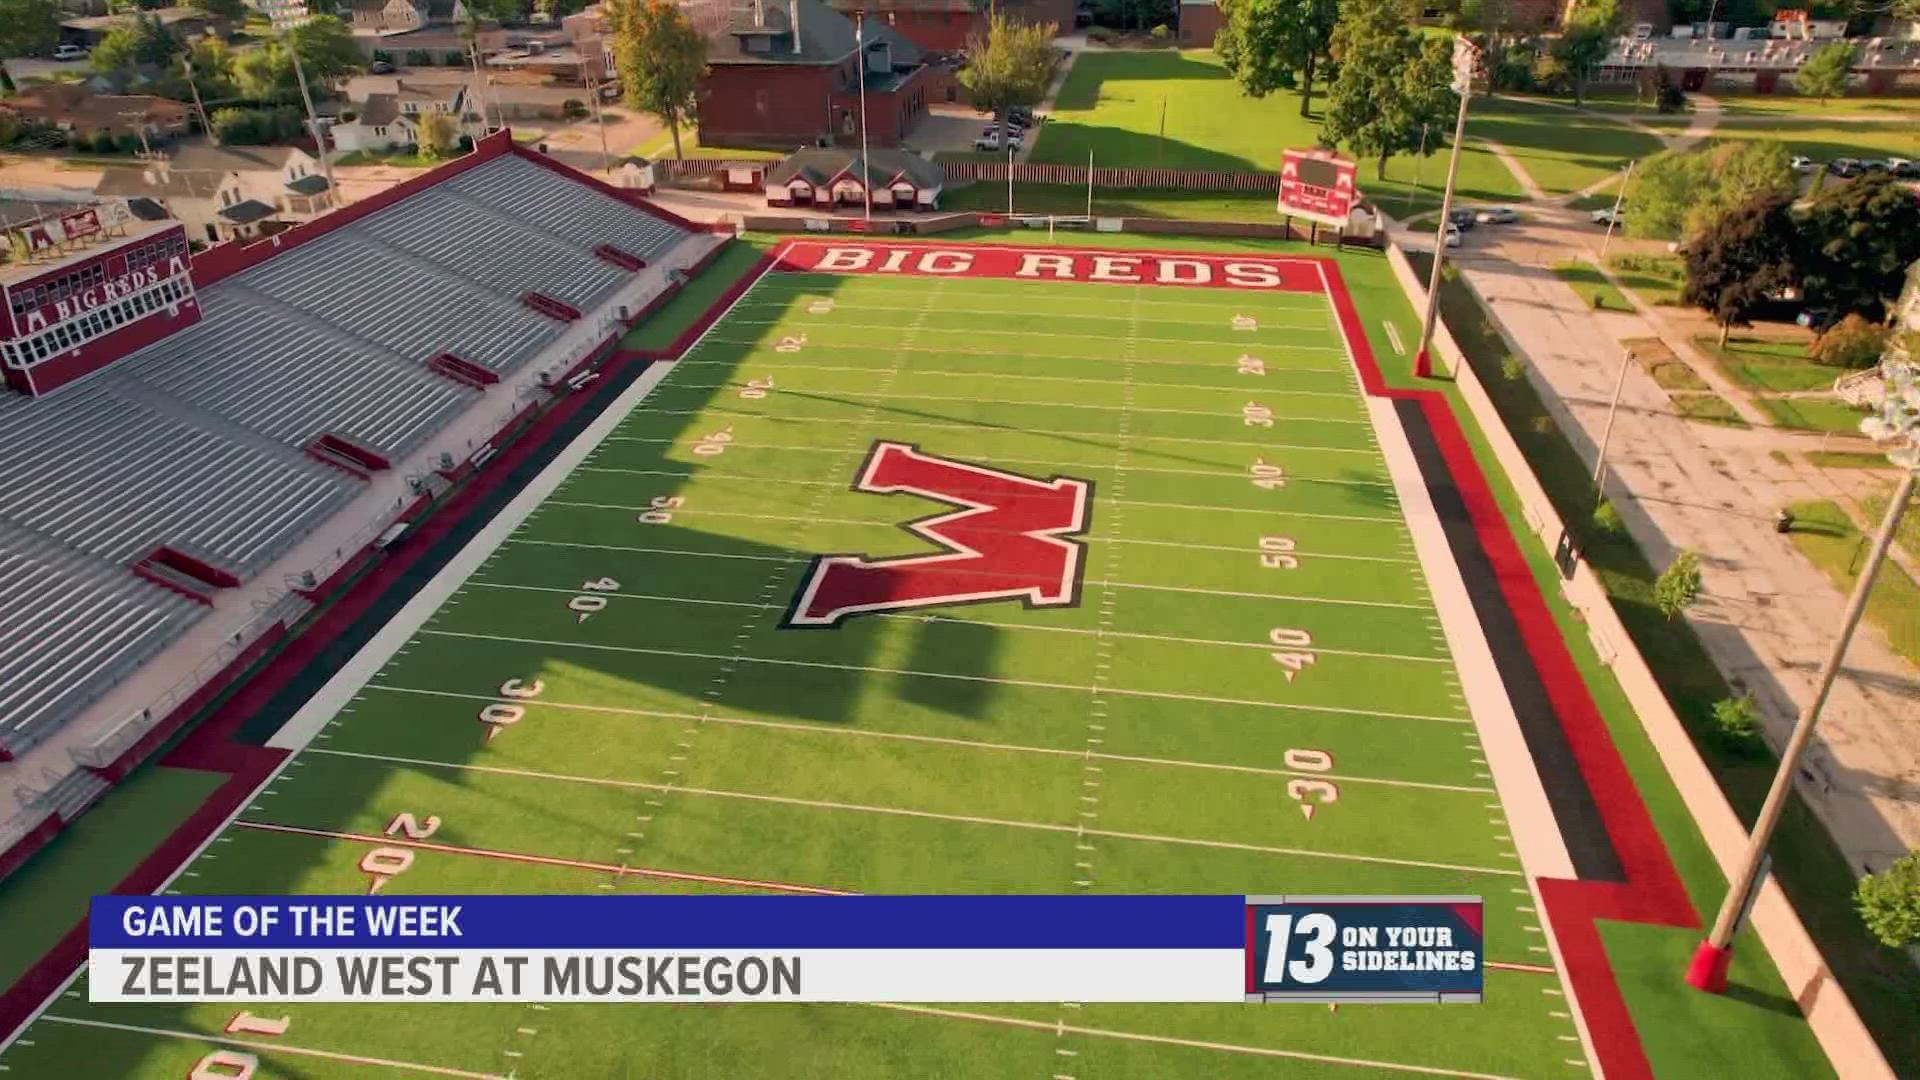 This week's 13 On Your Sidelines Game of the Week is between Zeeland West and Muskegon.